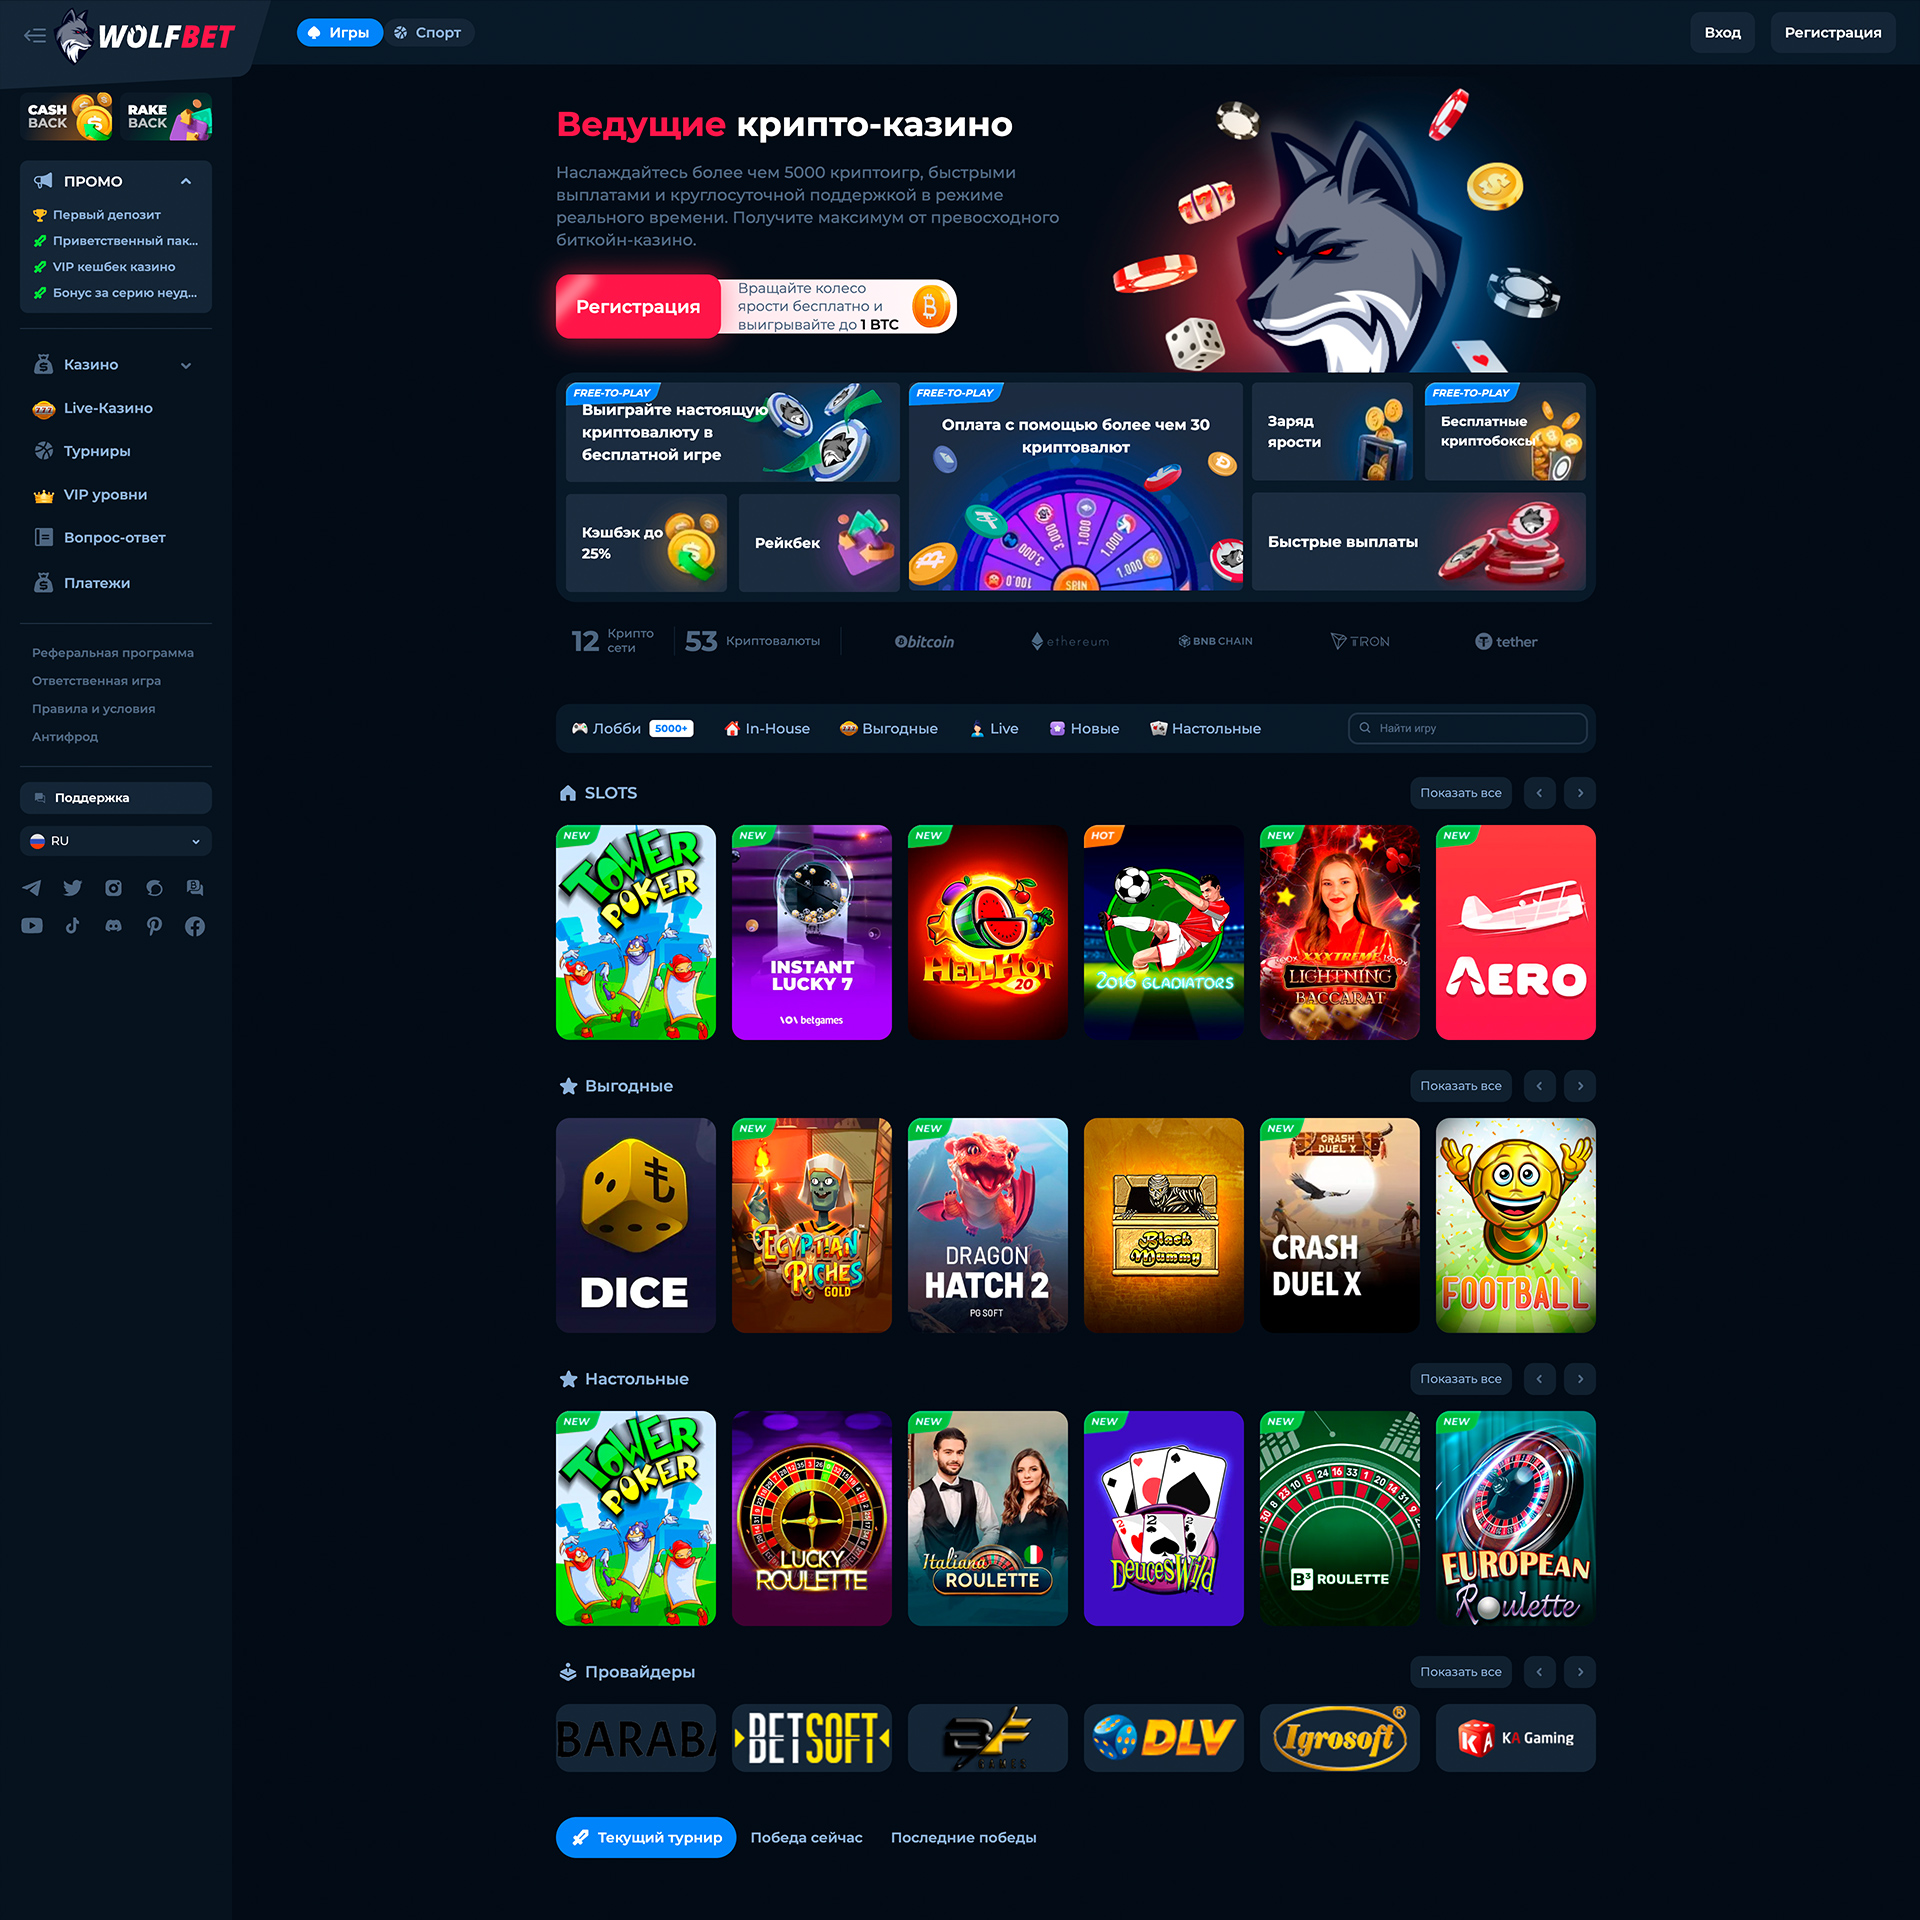 Online casino WolfBet with crypto games and betting module